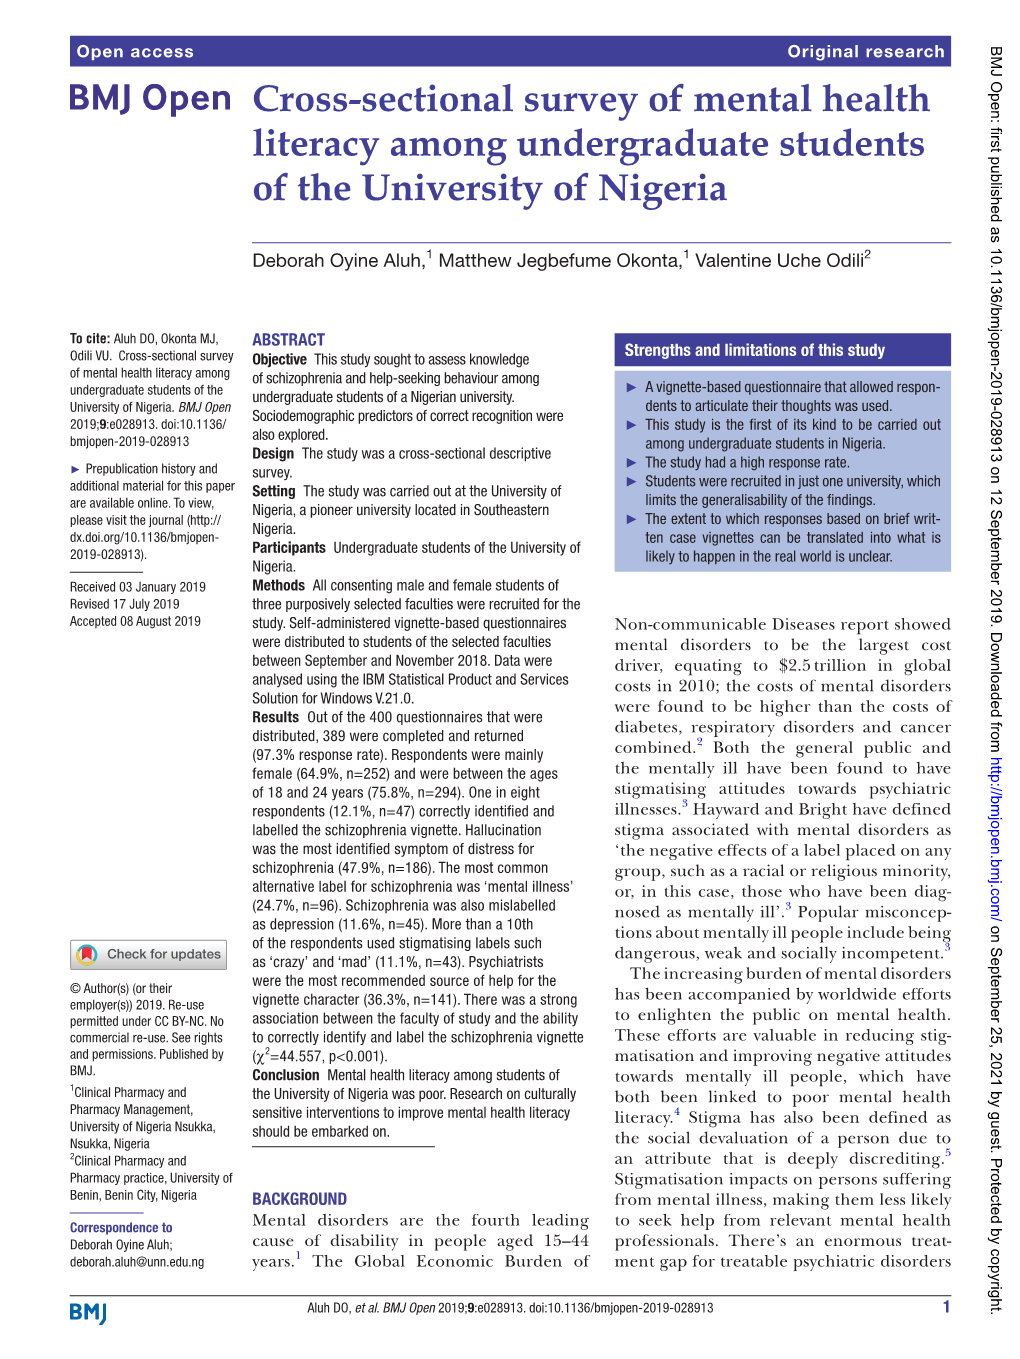 Cross-Sectional Survey of Mental Health Literacy Among Undergraduate Students of the University of Nigeria